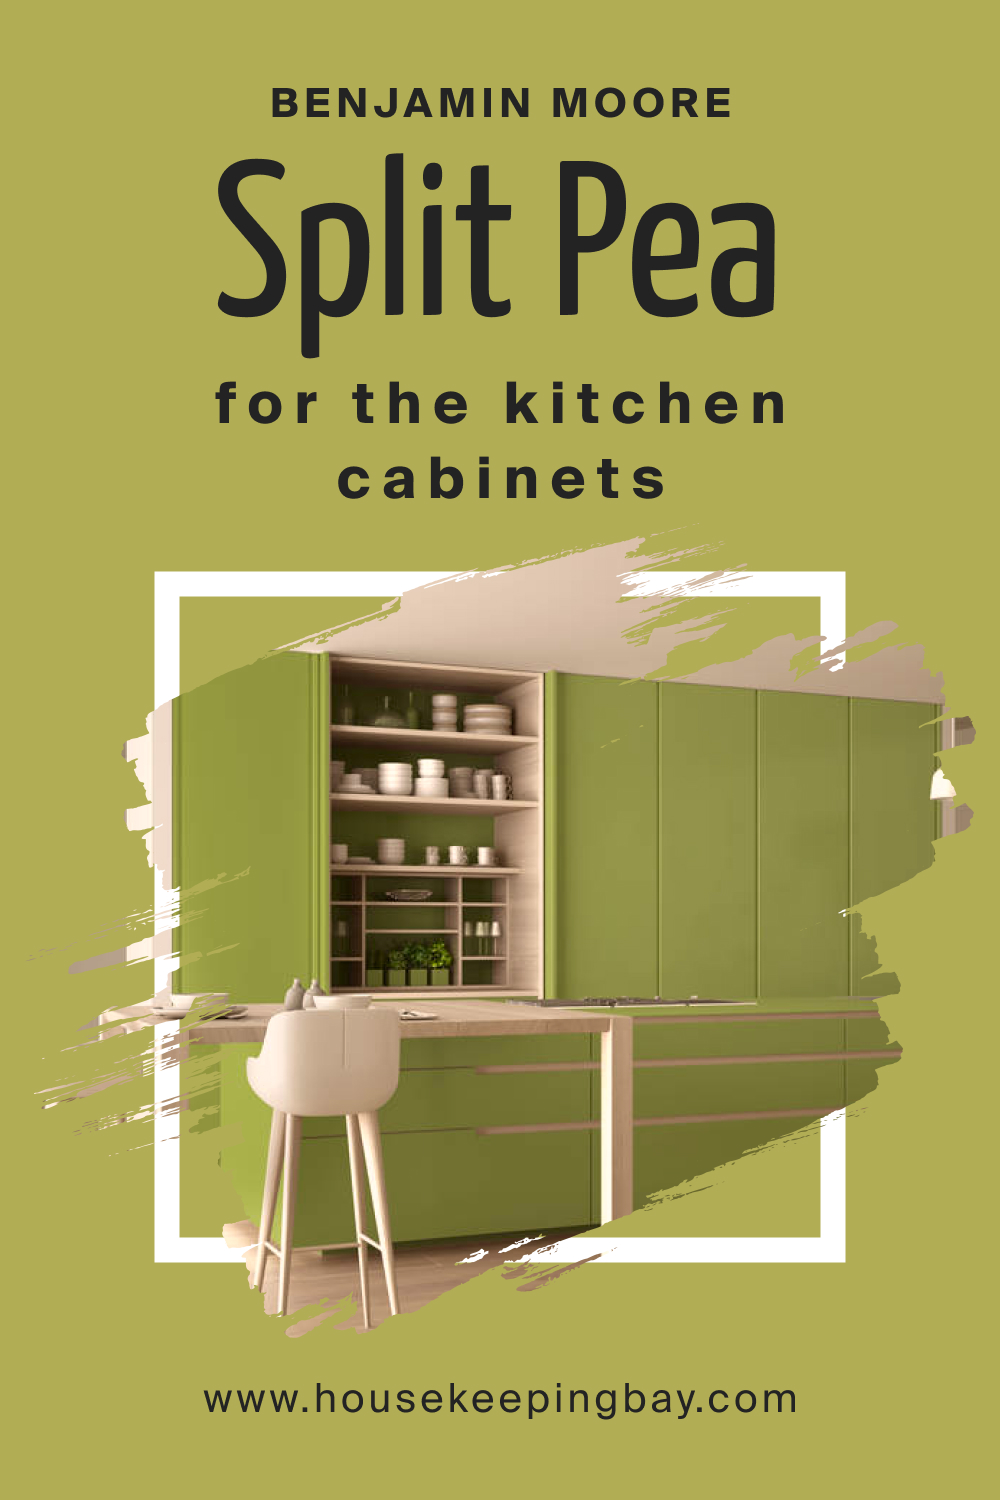 How to Use Split Pea 2146-30 on the Kitchen Cabinets?